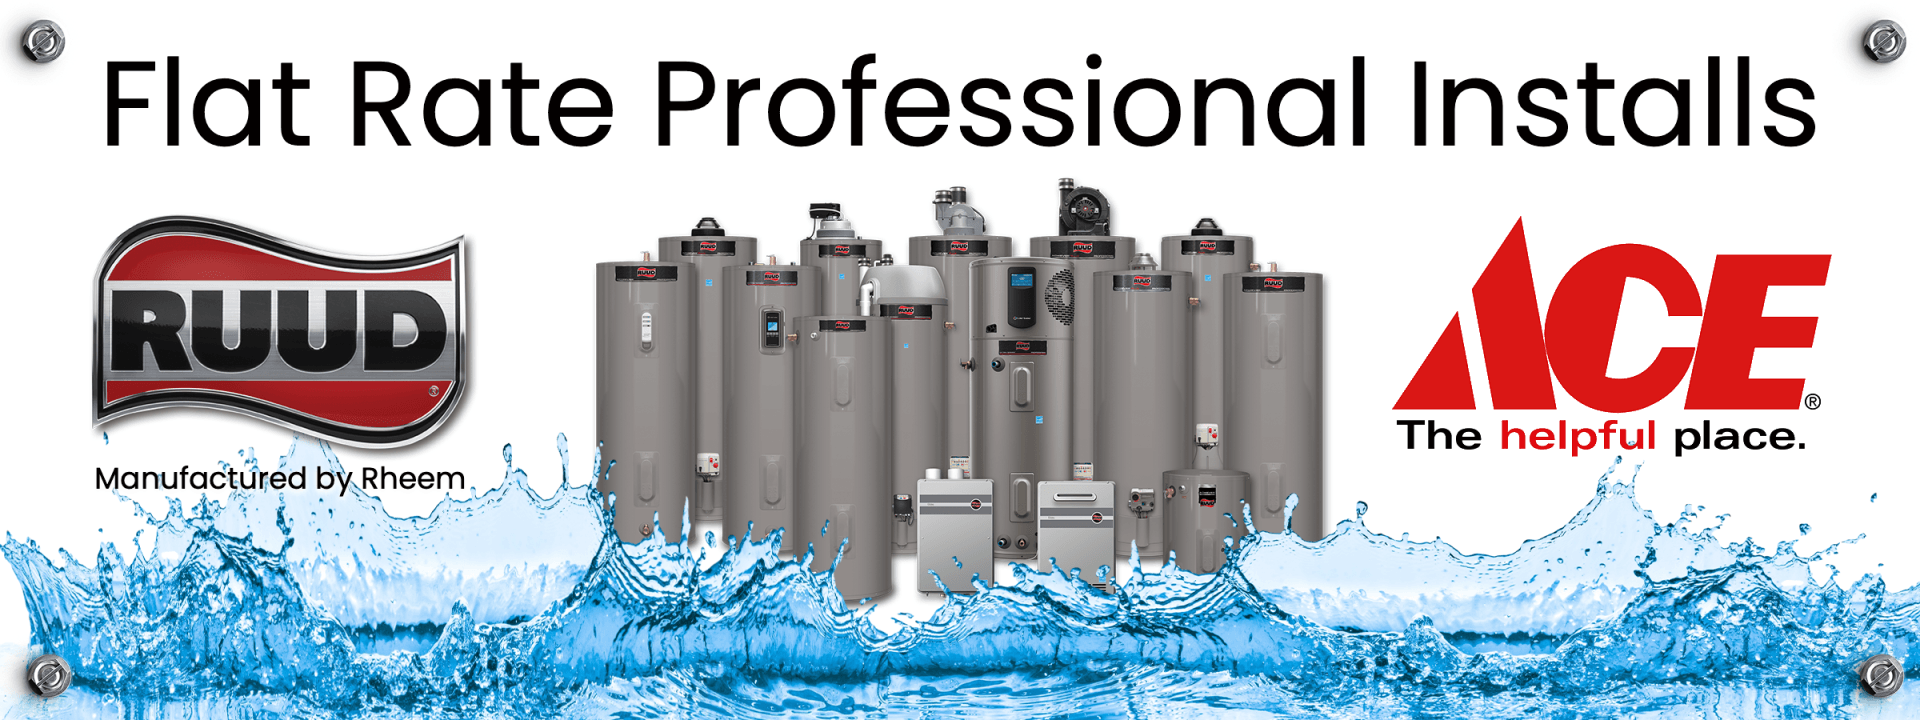 Ruud Water Heaters at Ace, Flat Rate Pricing Banner